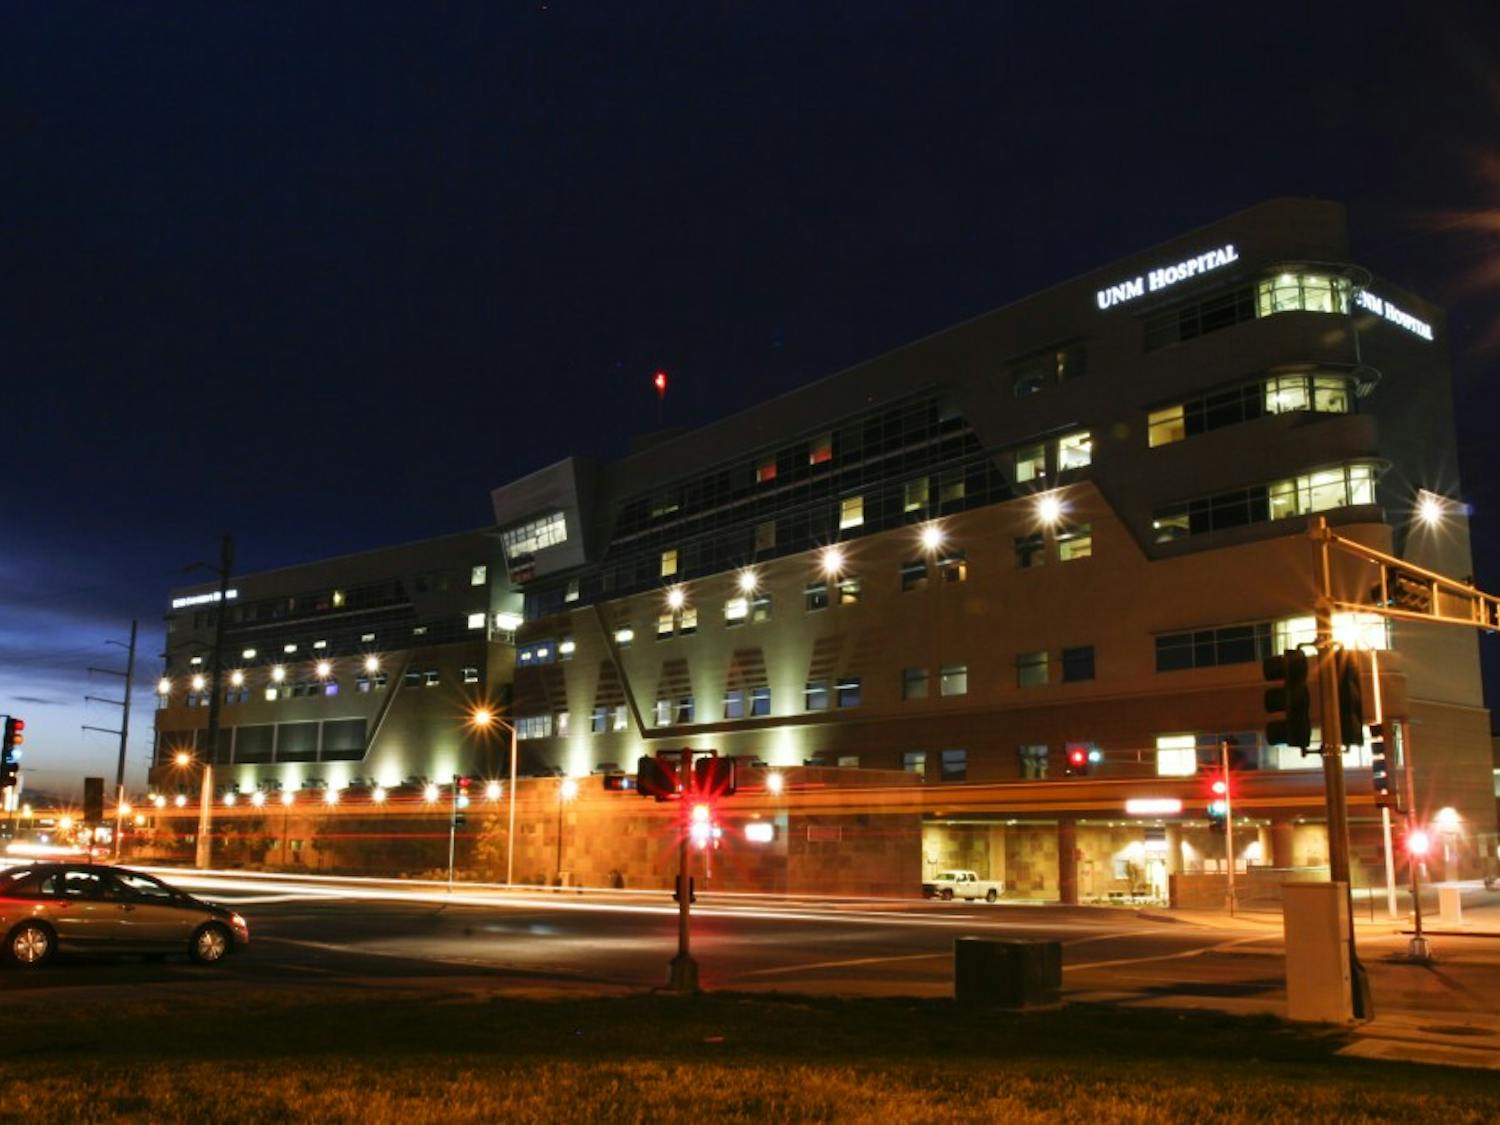 UNM Hospital received a D in safety based on the Fall 2014 update to Leapfrog Group’s Hospital Safety Score website, which assigns a standard letter grade to hospitals based on their ability to prevent medical errors.